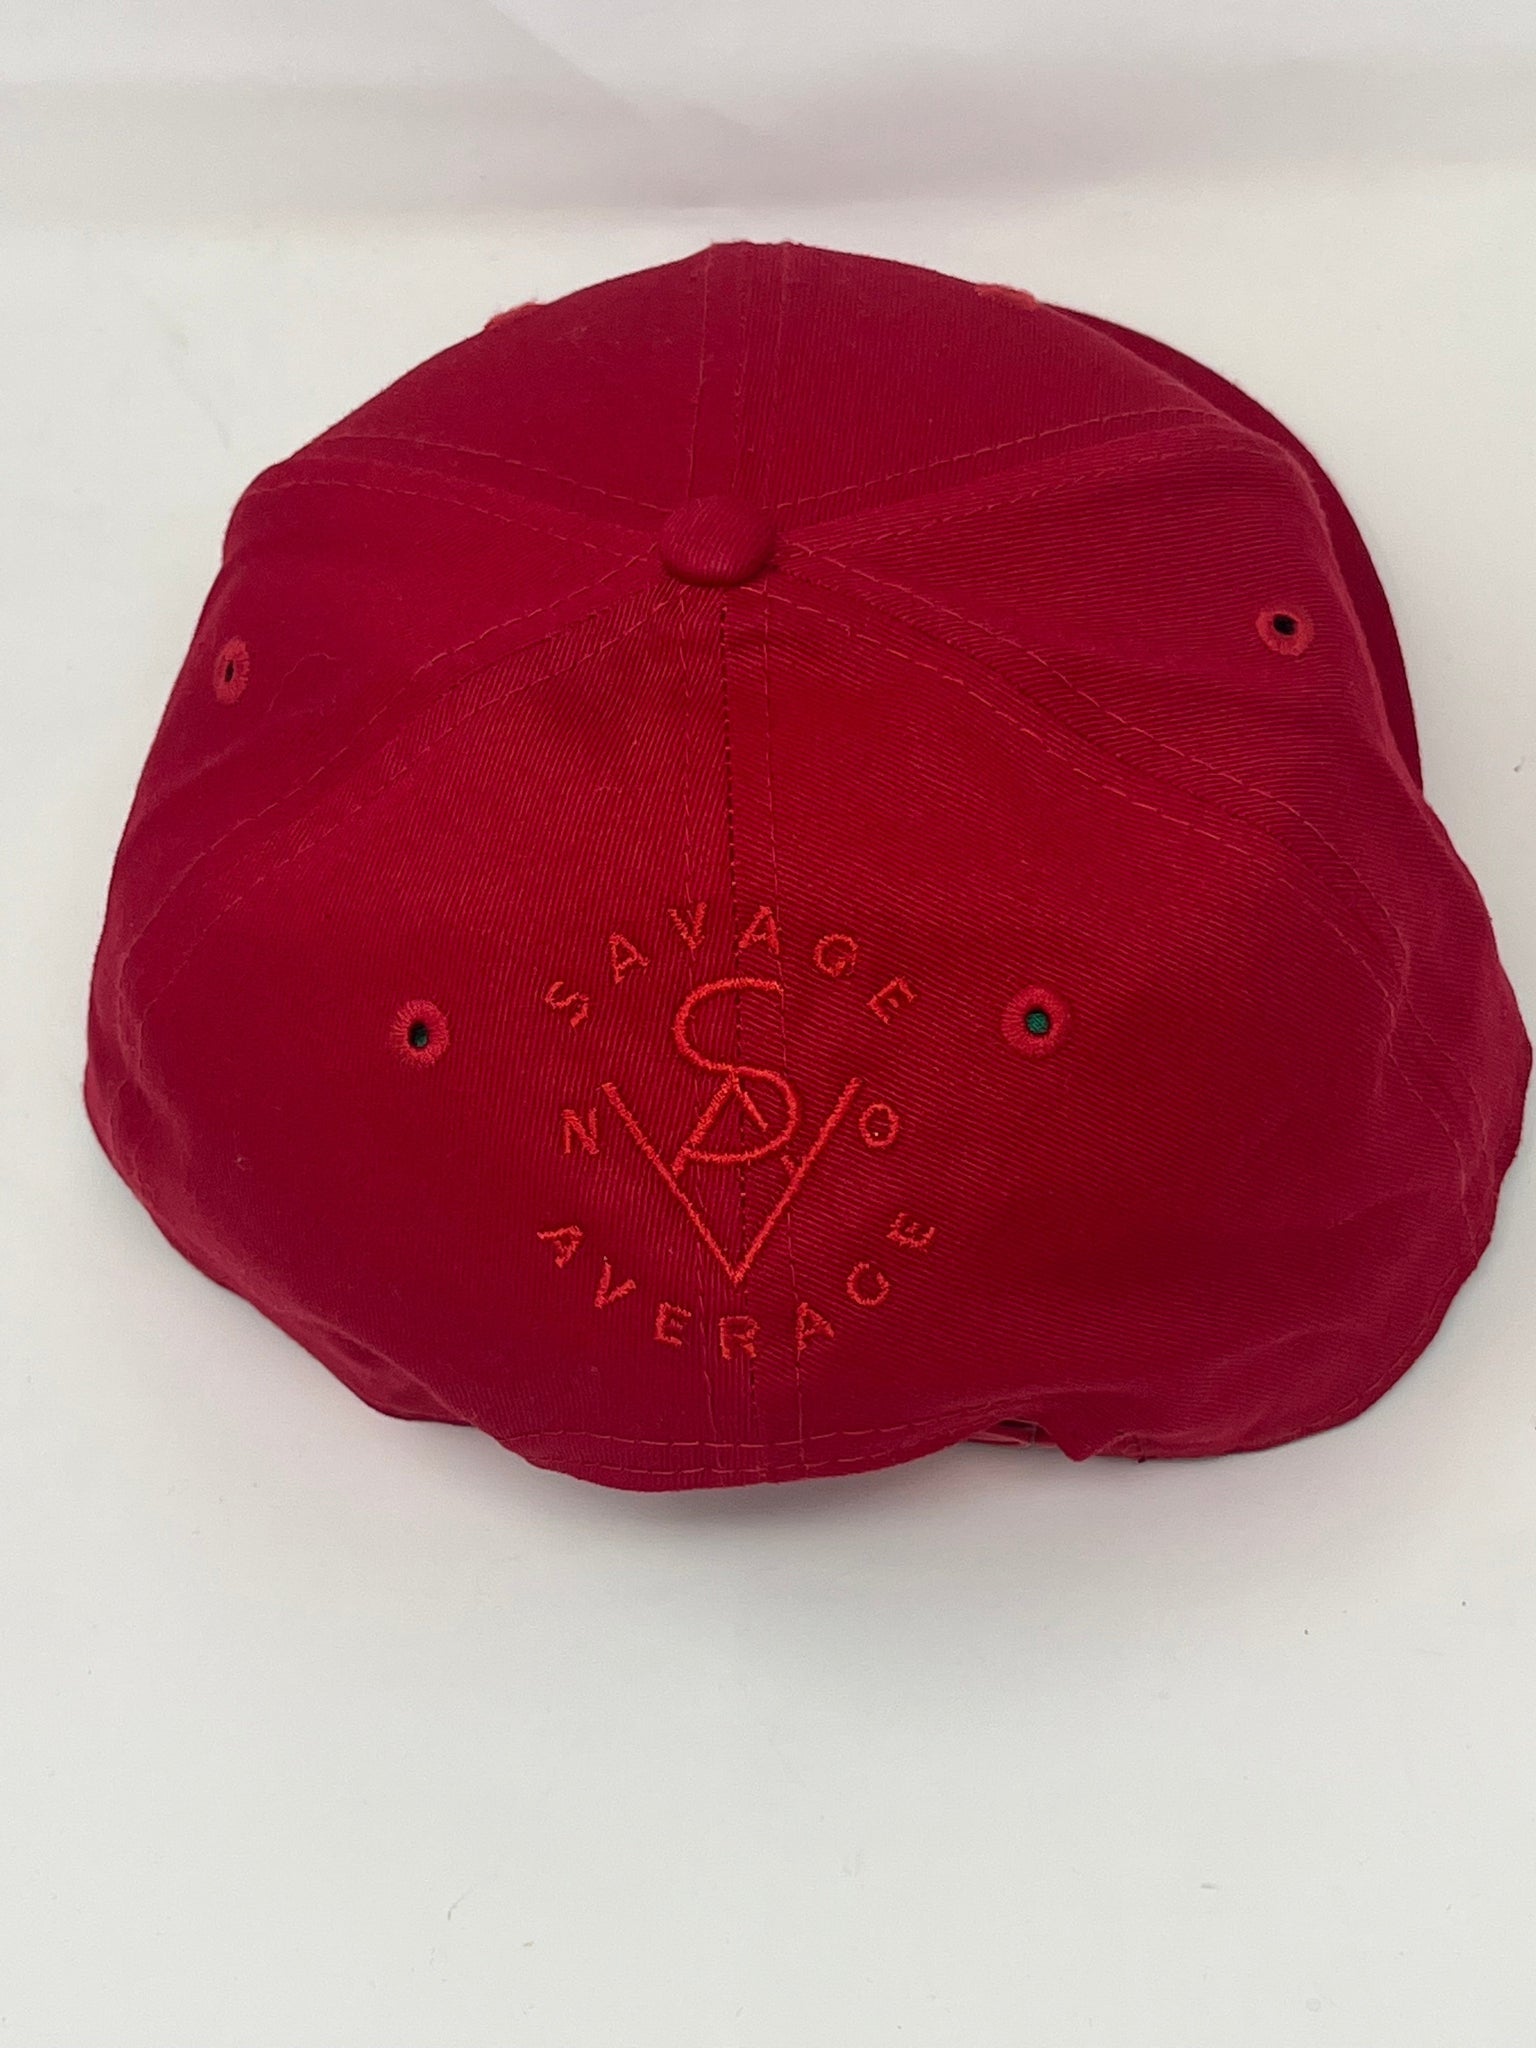 Urban Edge Snapback with Emblematic Shield Design - Red Hat